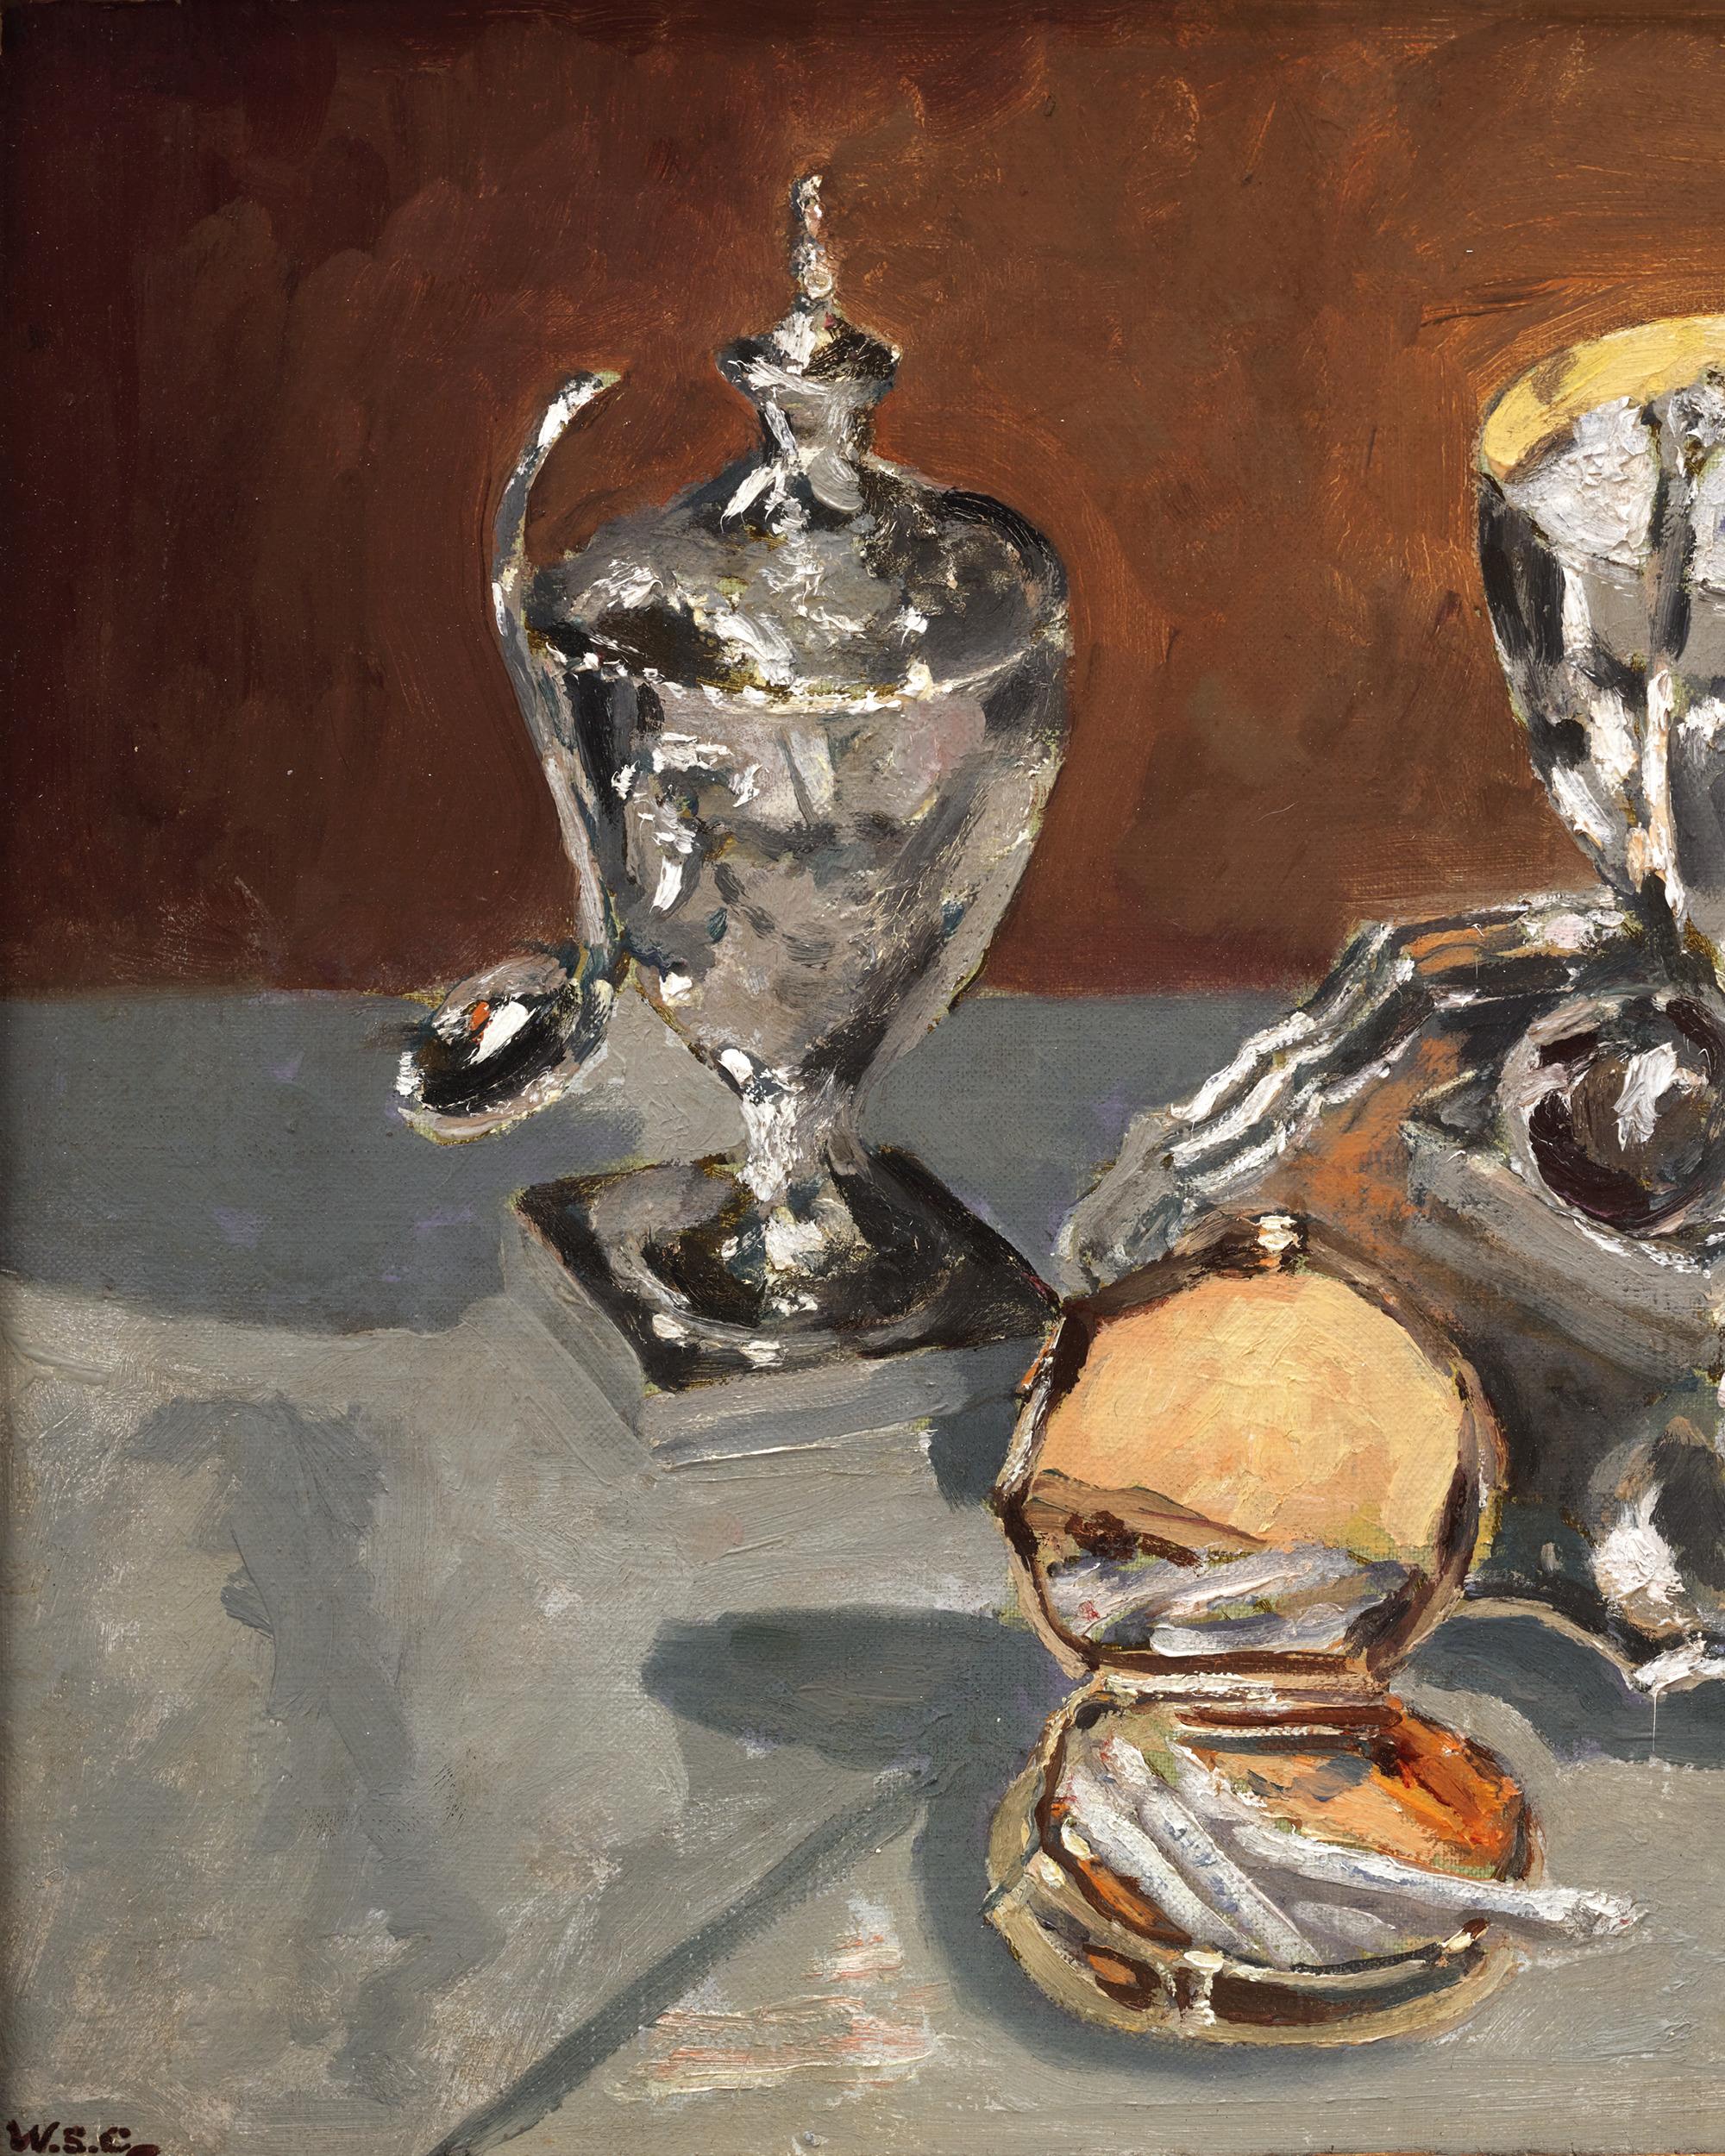 Believed by many to be the greatest Briton of all time, Winston Churchill was a revered statesman and a highly talented painter. This lovely work of art by the great man, Still Life, Silver at Chartwell, clearly displays his impressive skill as an